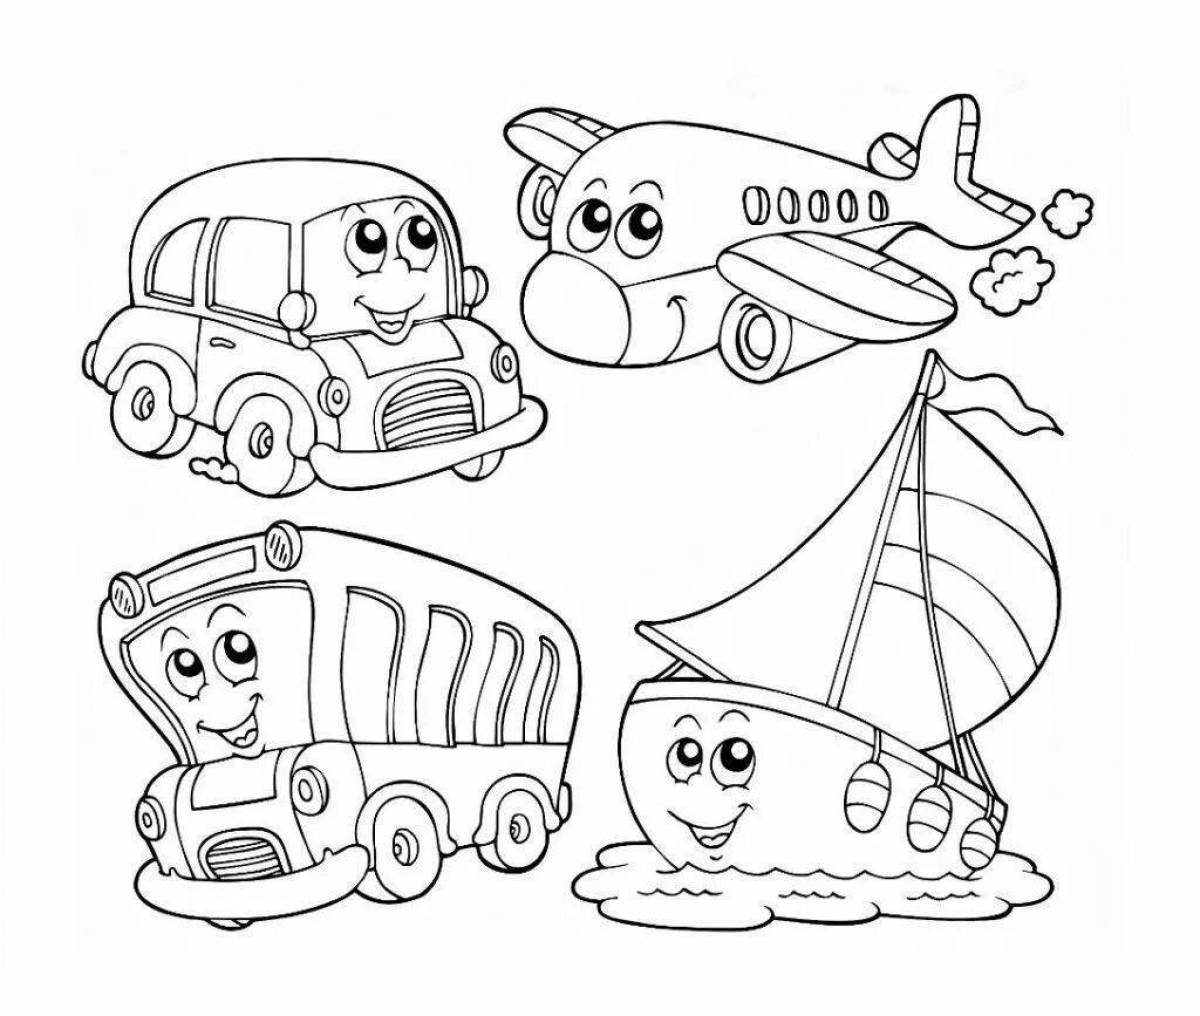 Cute coloring page middle page